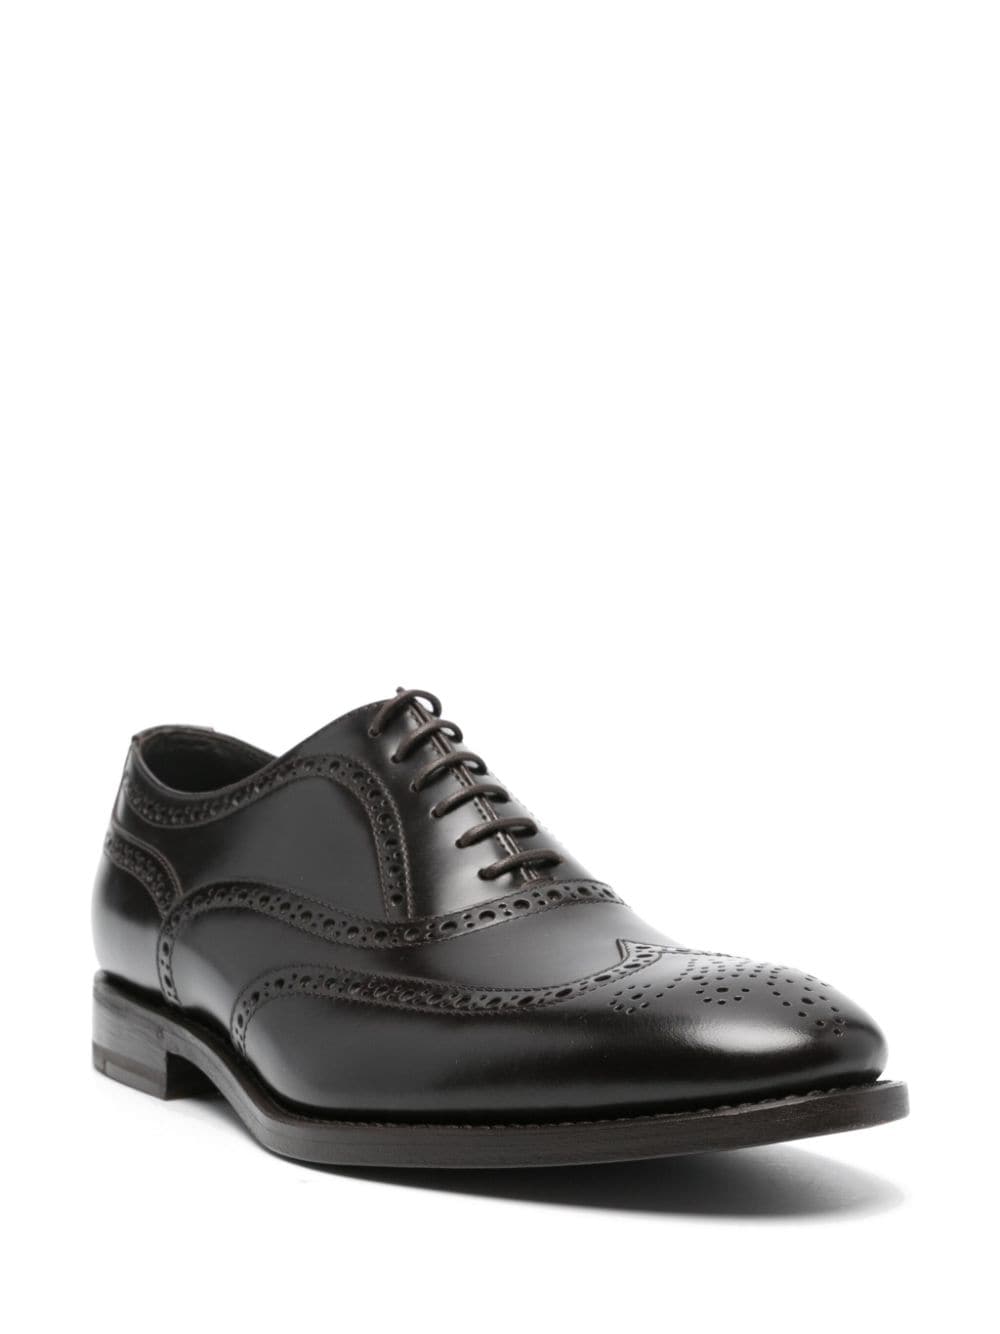 Image 2 of Henderson Baracco perforated-detail leather oxford shoes